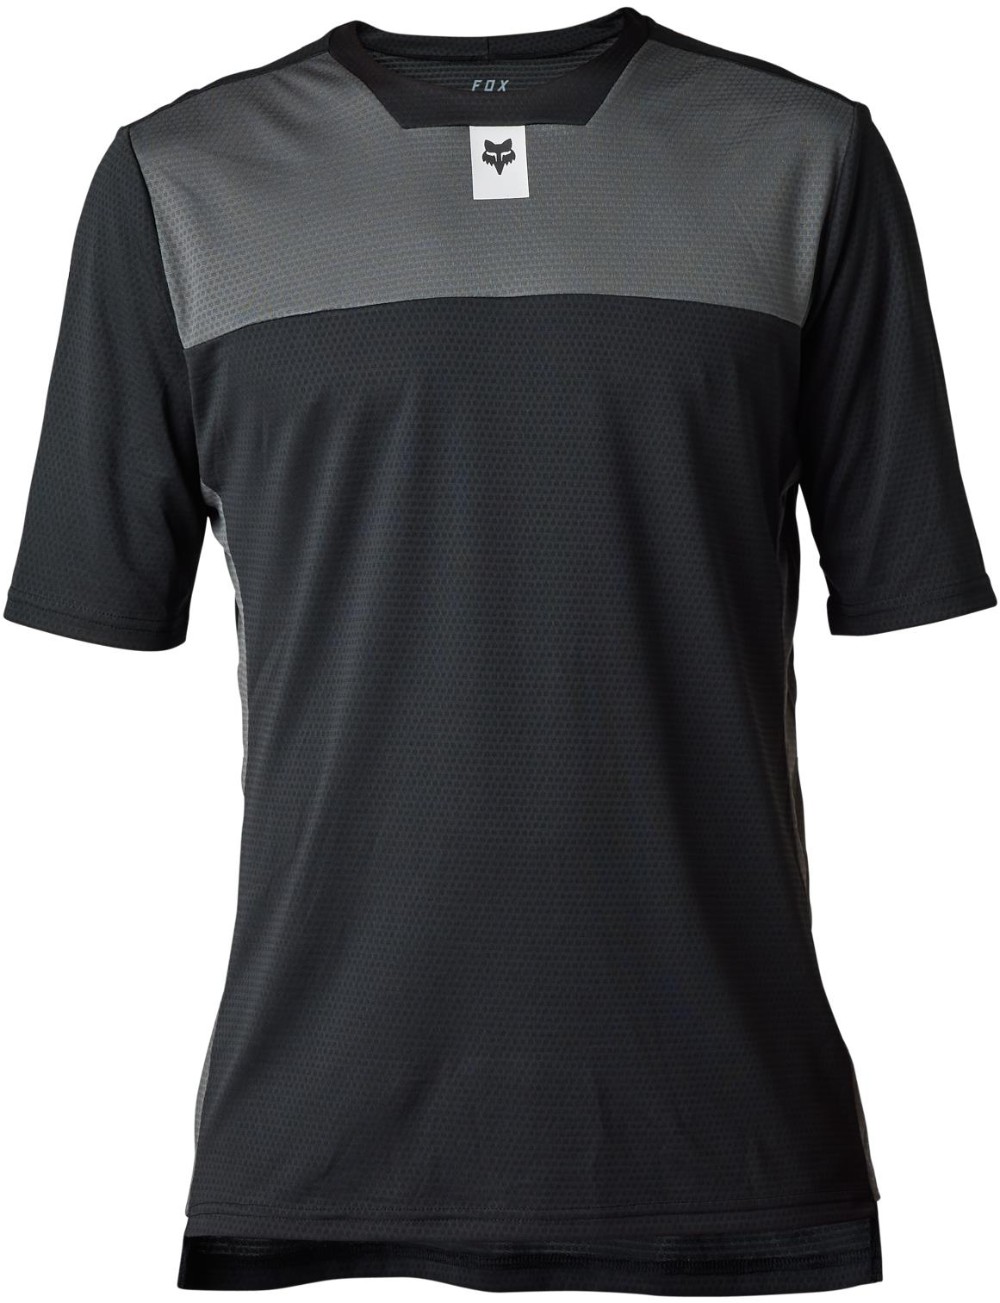 Defend Short Sleeve Cycling Jersey image 0